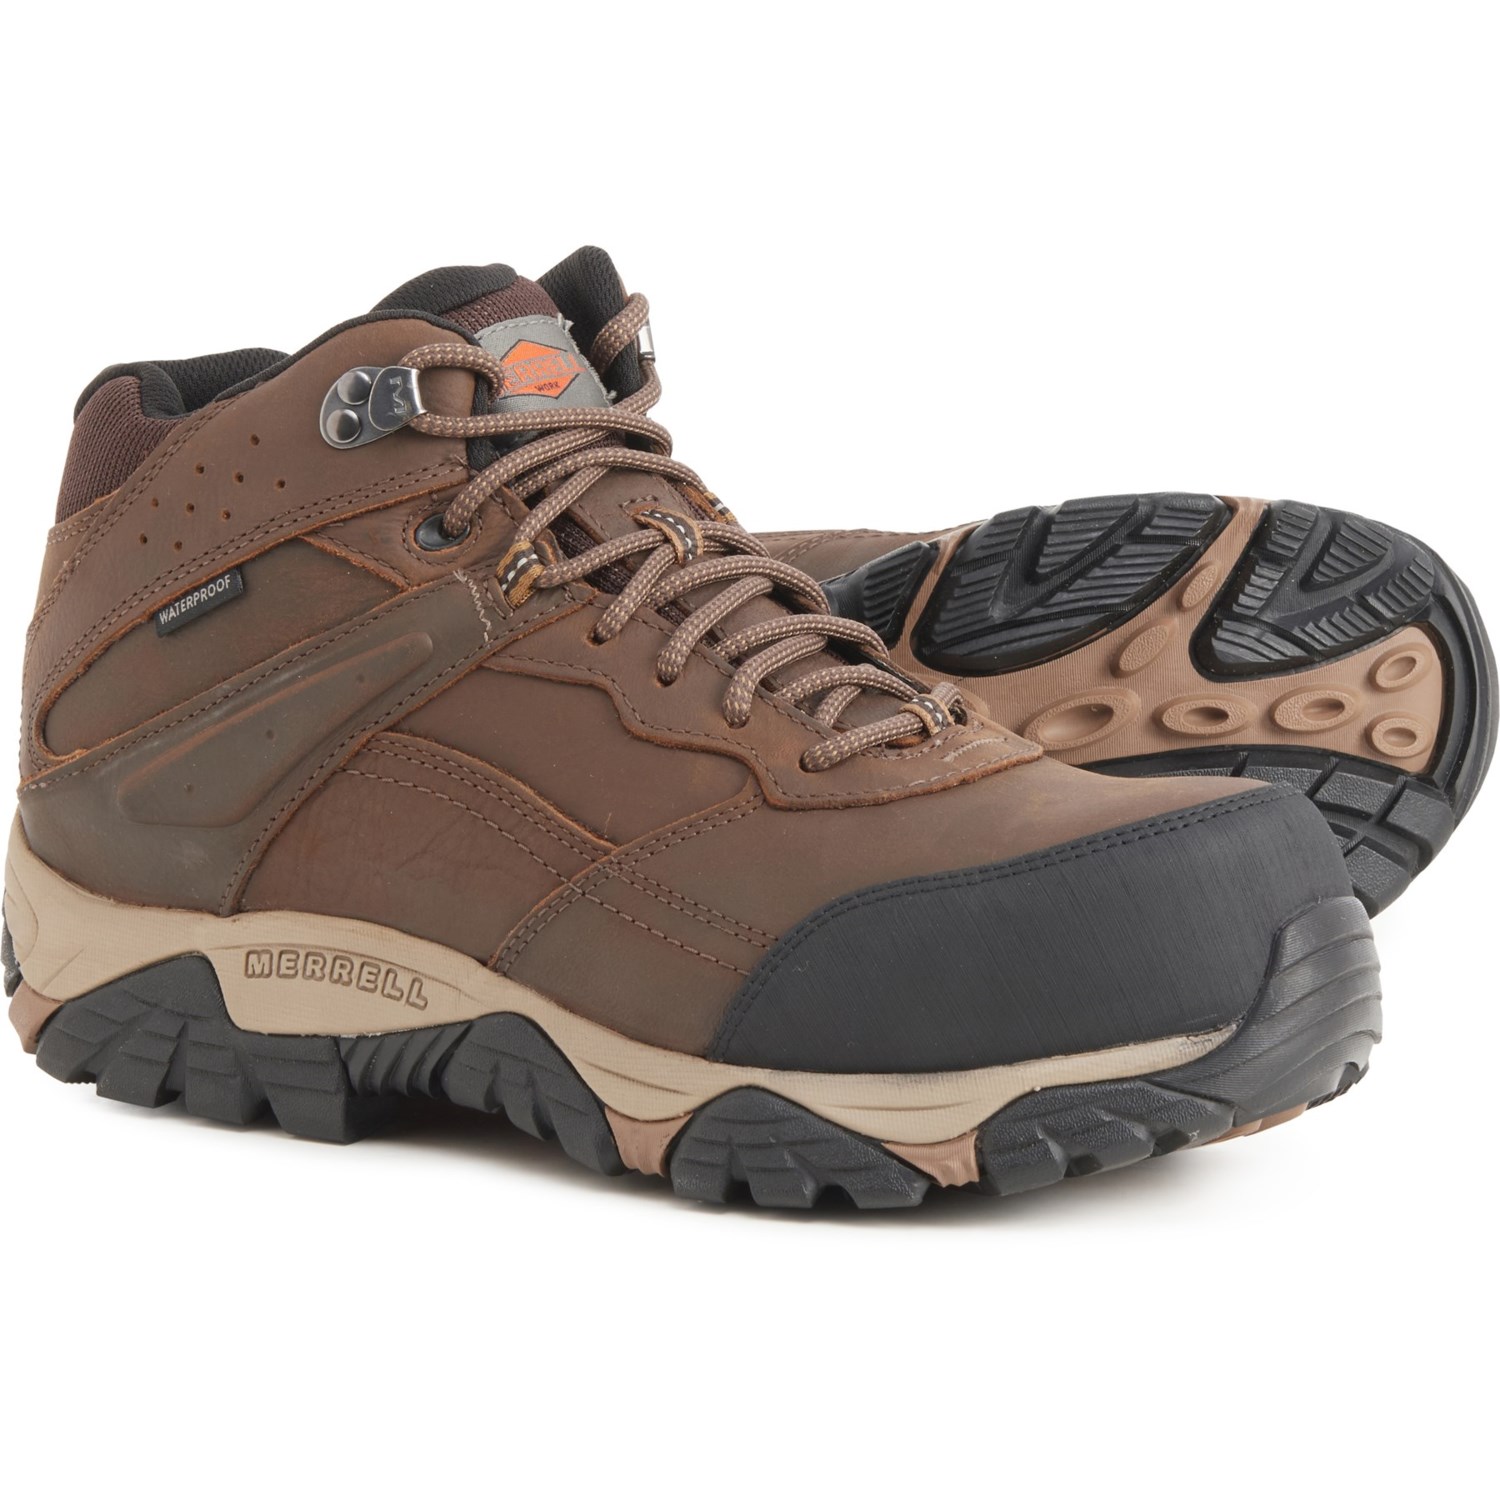 Merrell Moab Adventure Mid Boots - Waterproof, Carbon Fiber Safety Toe (For Men)